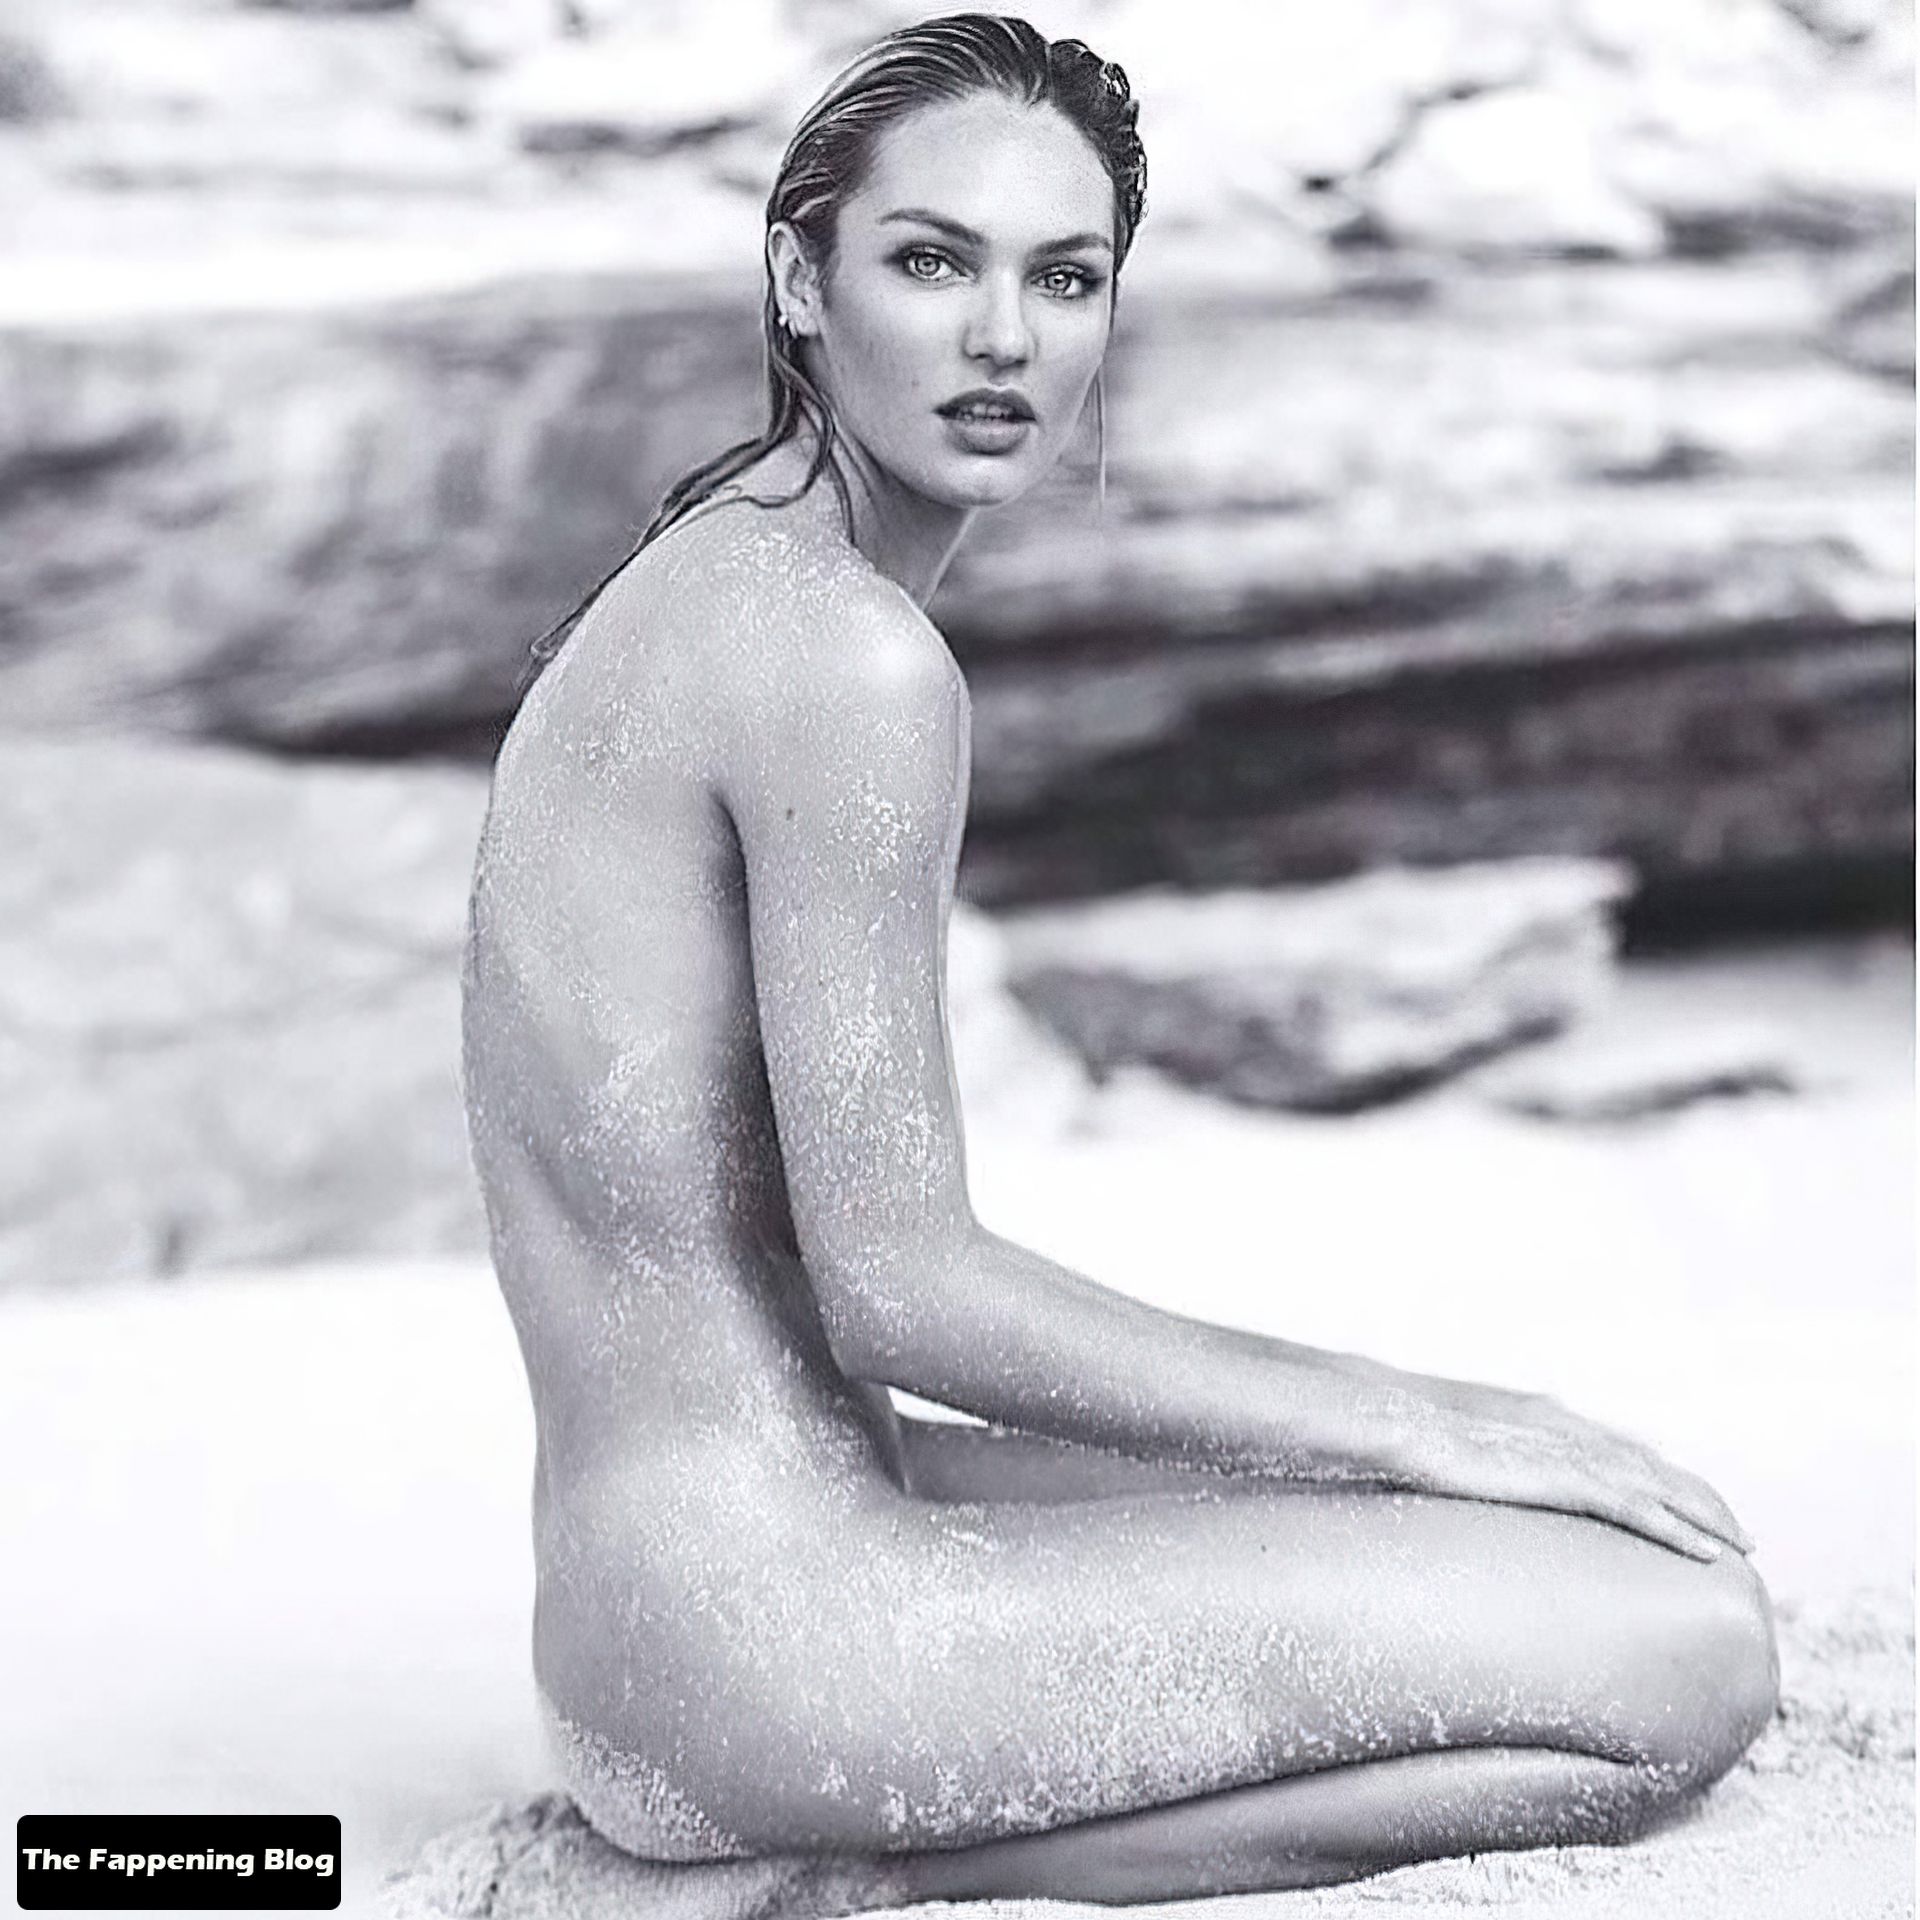 candice-swanepoel-naked-on-beach-2-thefappeningblog.com_.jpg